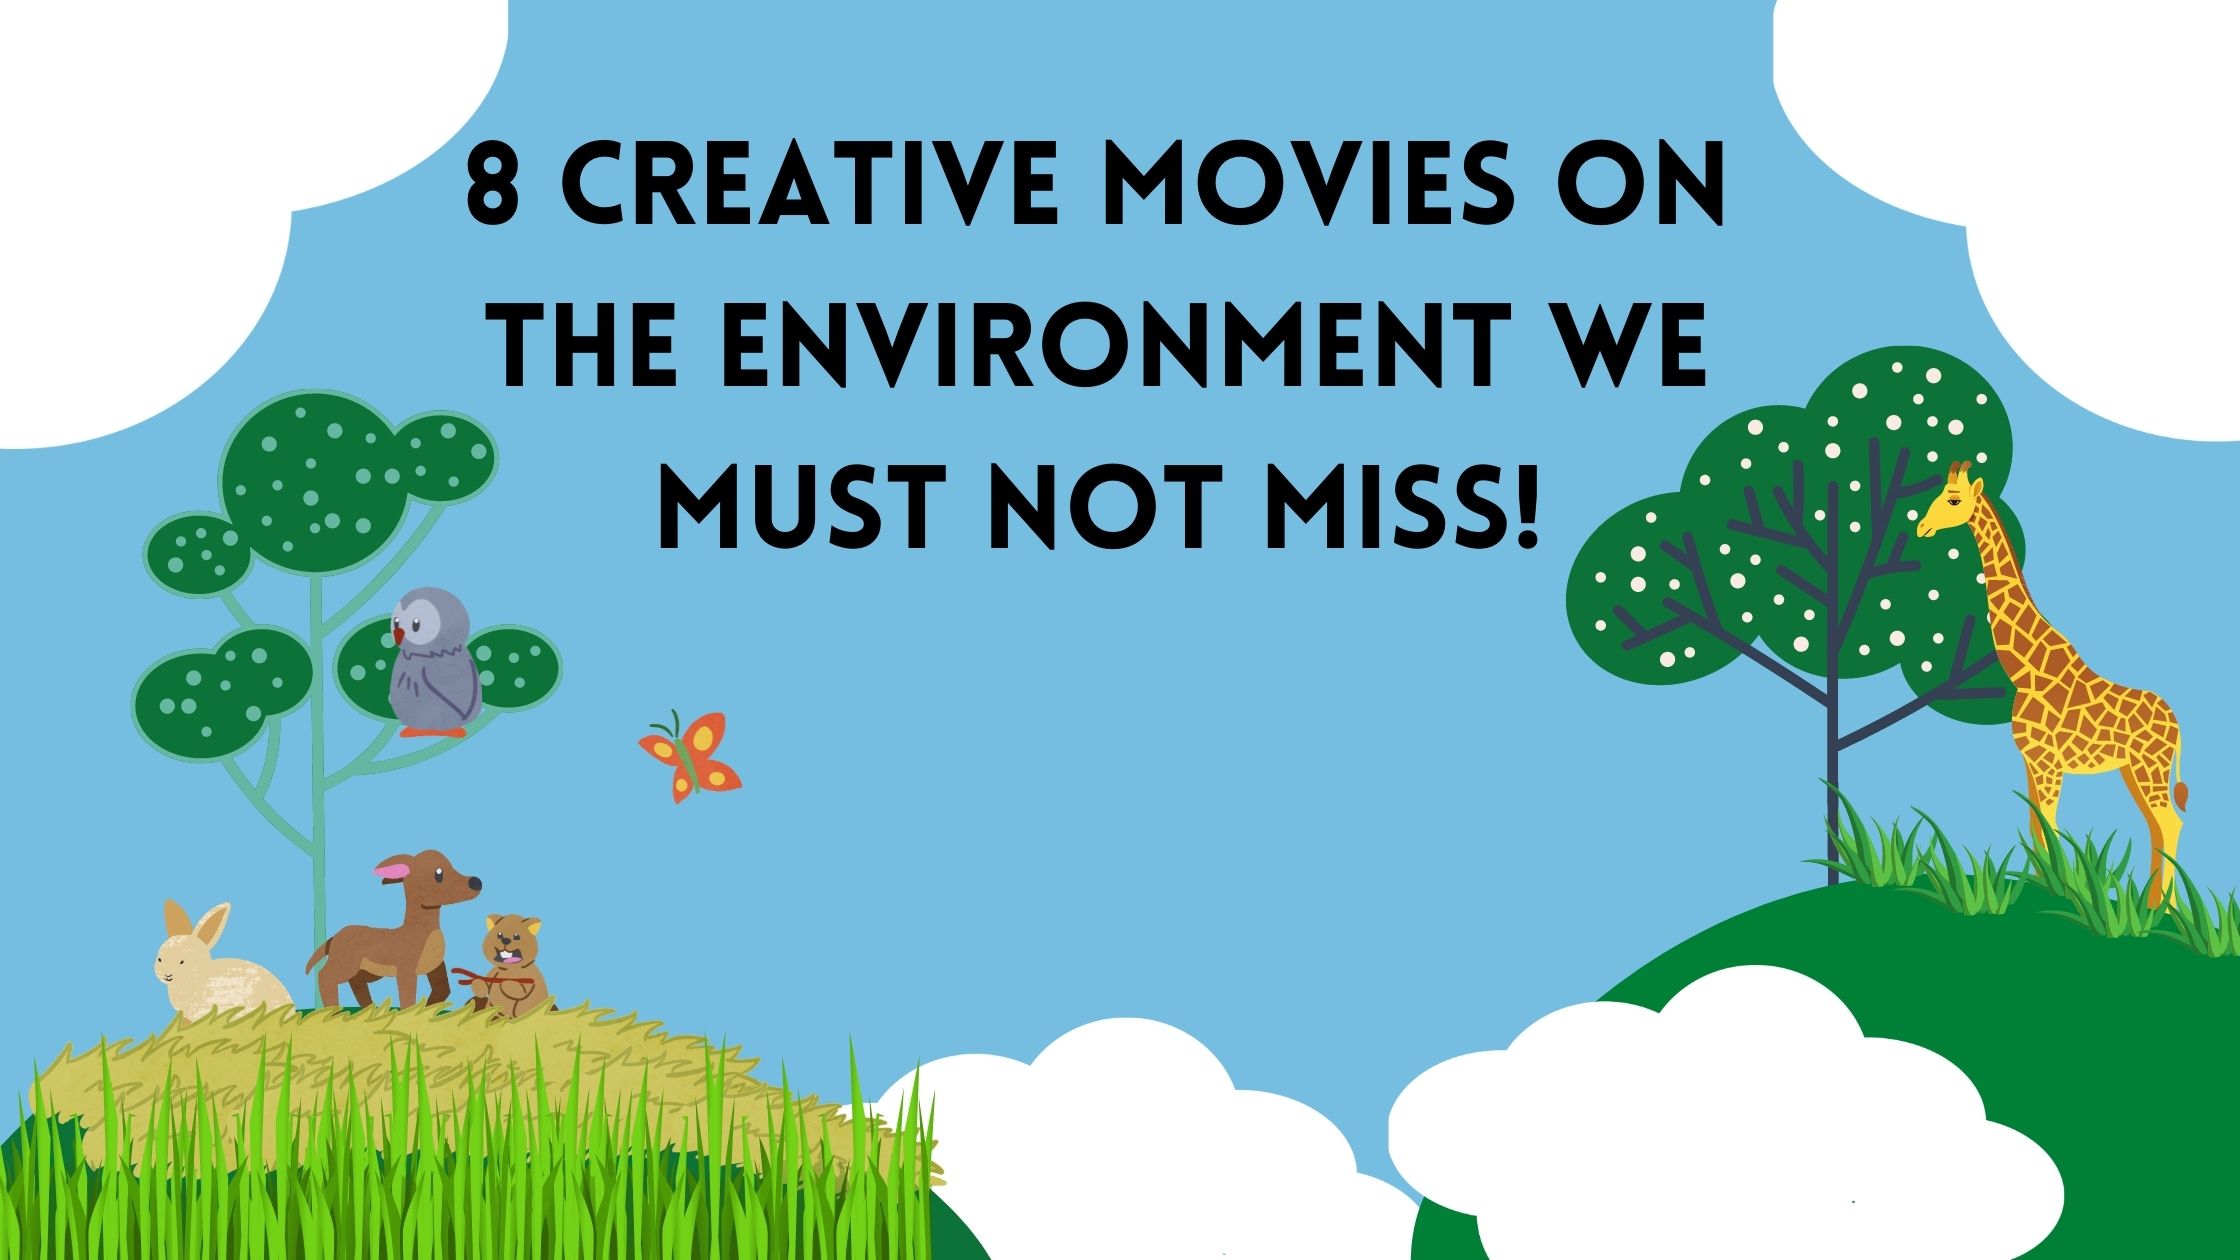 8 creative movies on the environment we must not miss!